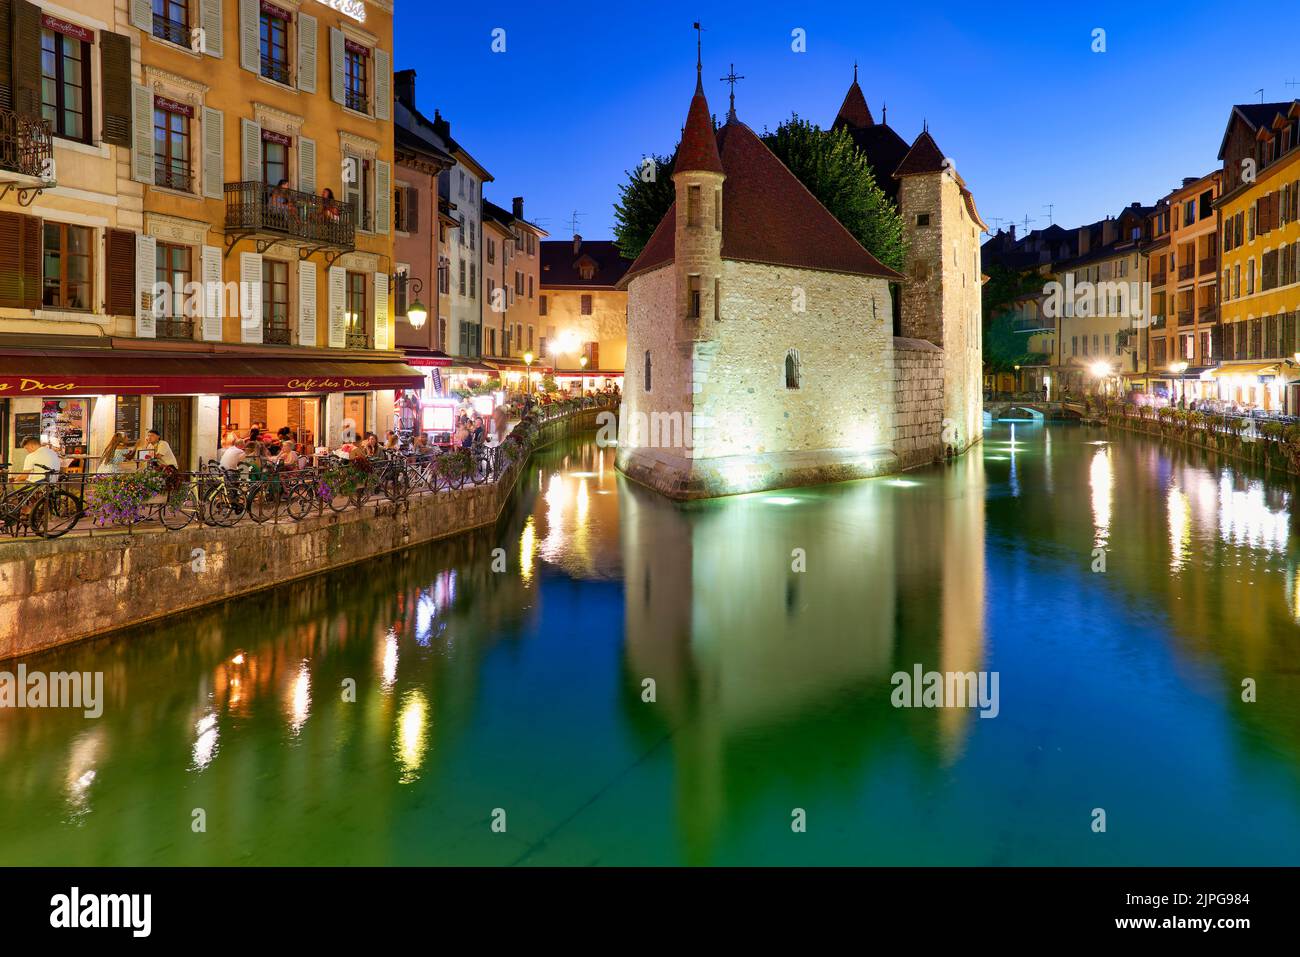 Annecy Haute Savoie France. The Palais de l'Isle and Thiou river at sunset Stock Photo